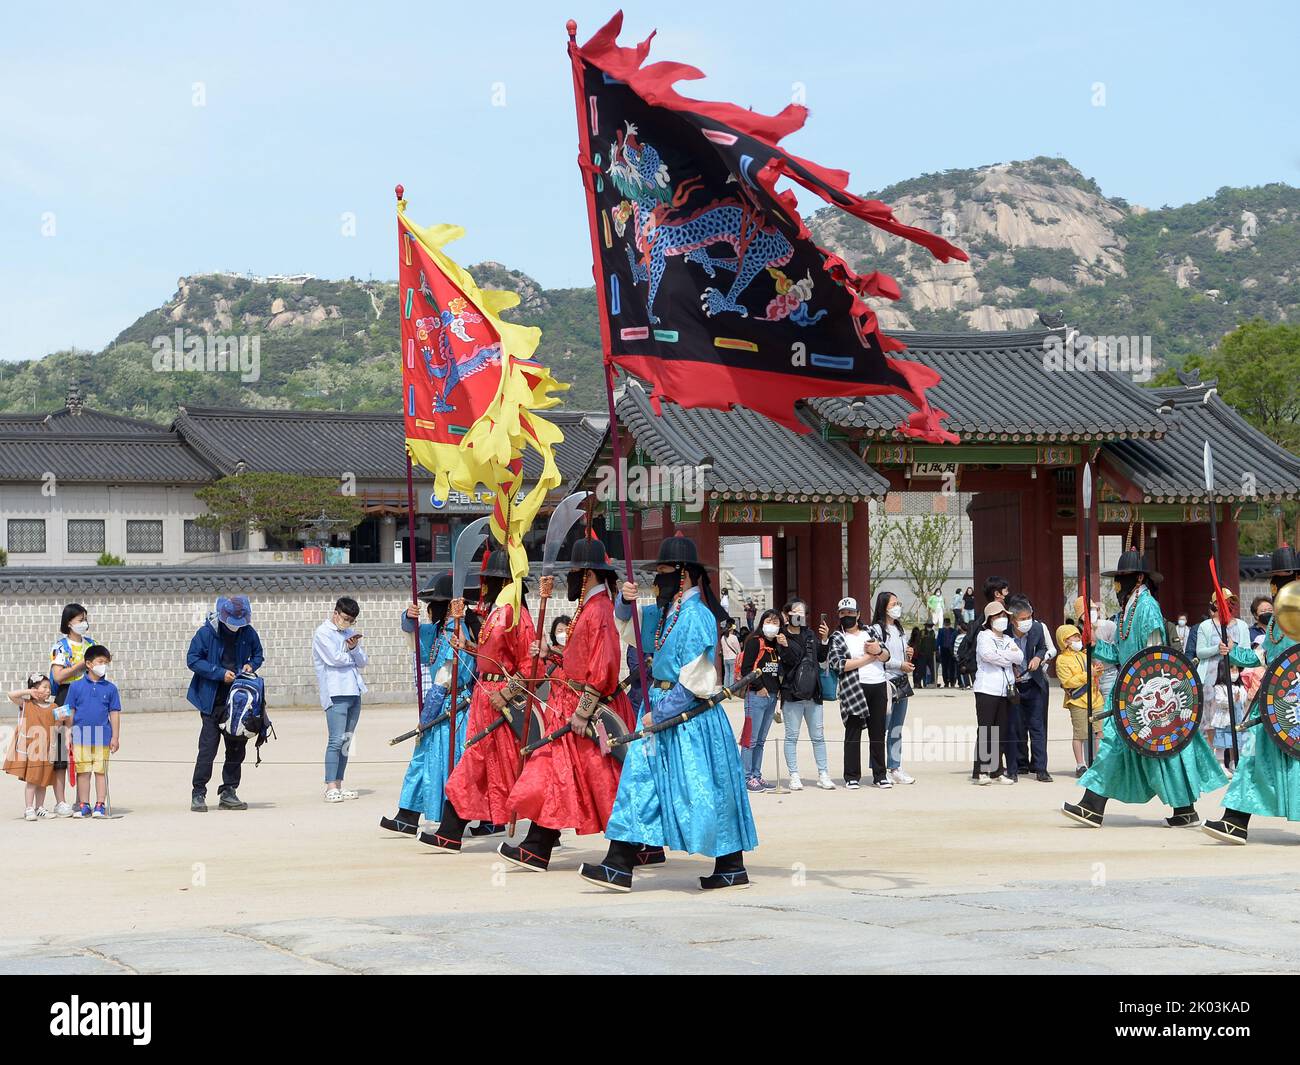 Masked soldiers during the Covid-19 pandemic at the Gyeongbokgung Palace, in Seoul, main royal palace of the Joseon dynasty. Built in 1395, it is located in northern Seoul, South Korea. Stock Photo